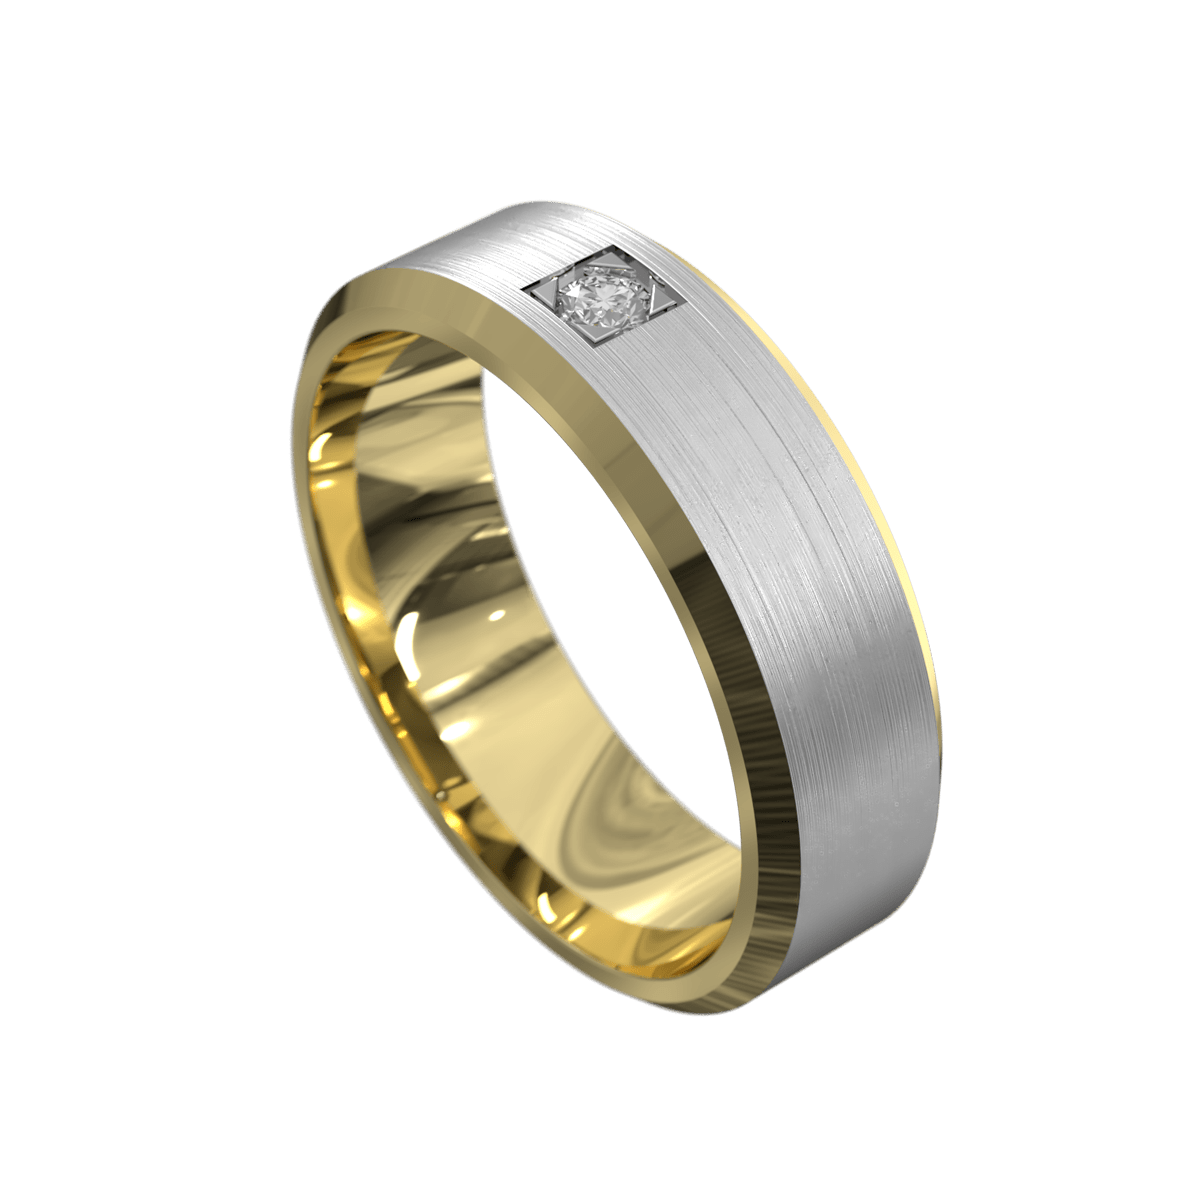 Brushed Yellow and White Gold Mens Wedding Ring